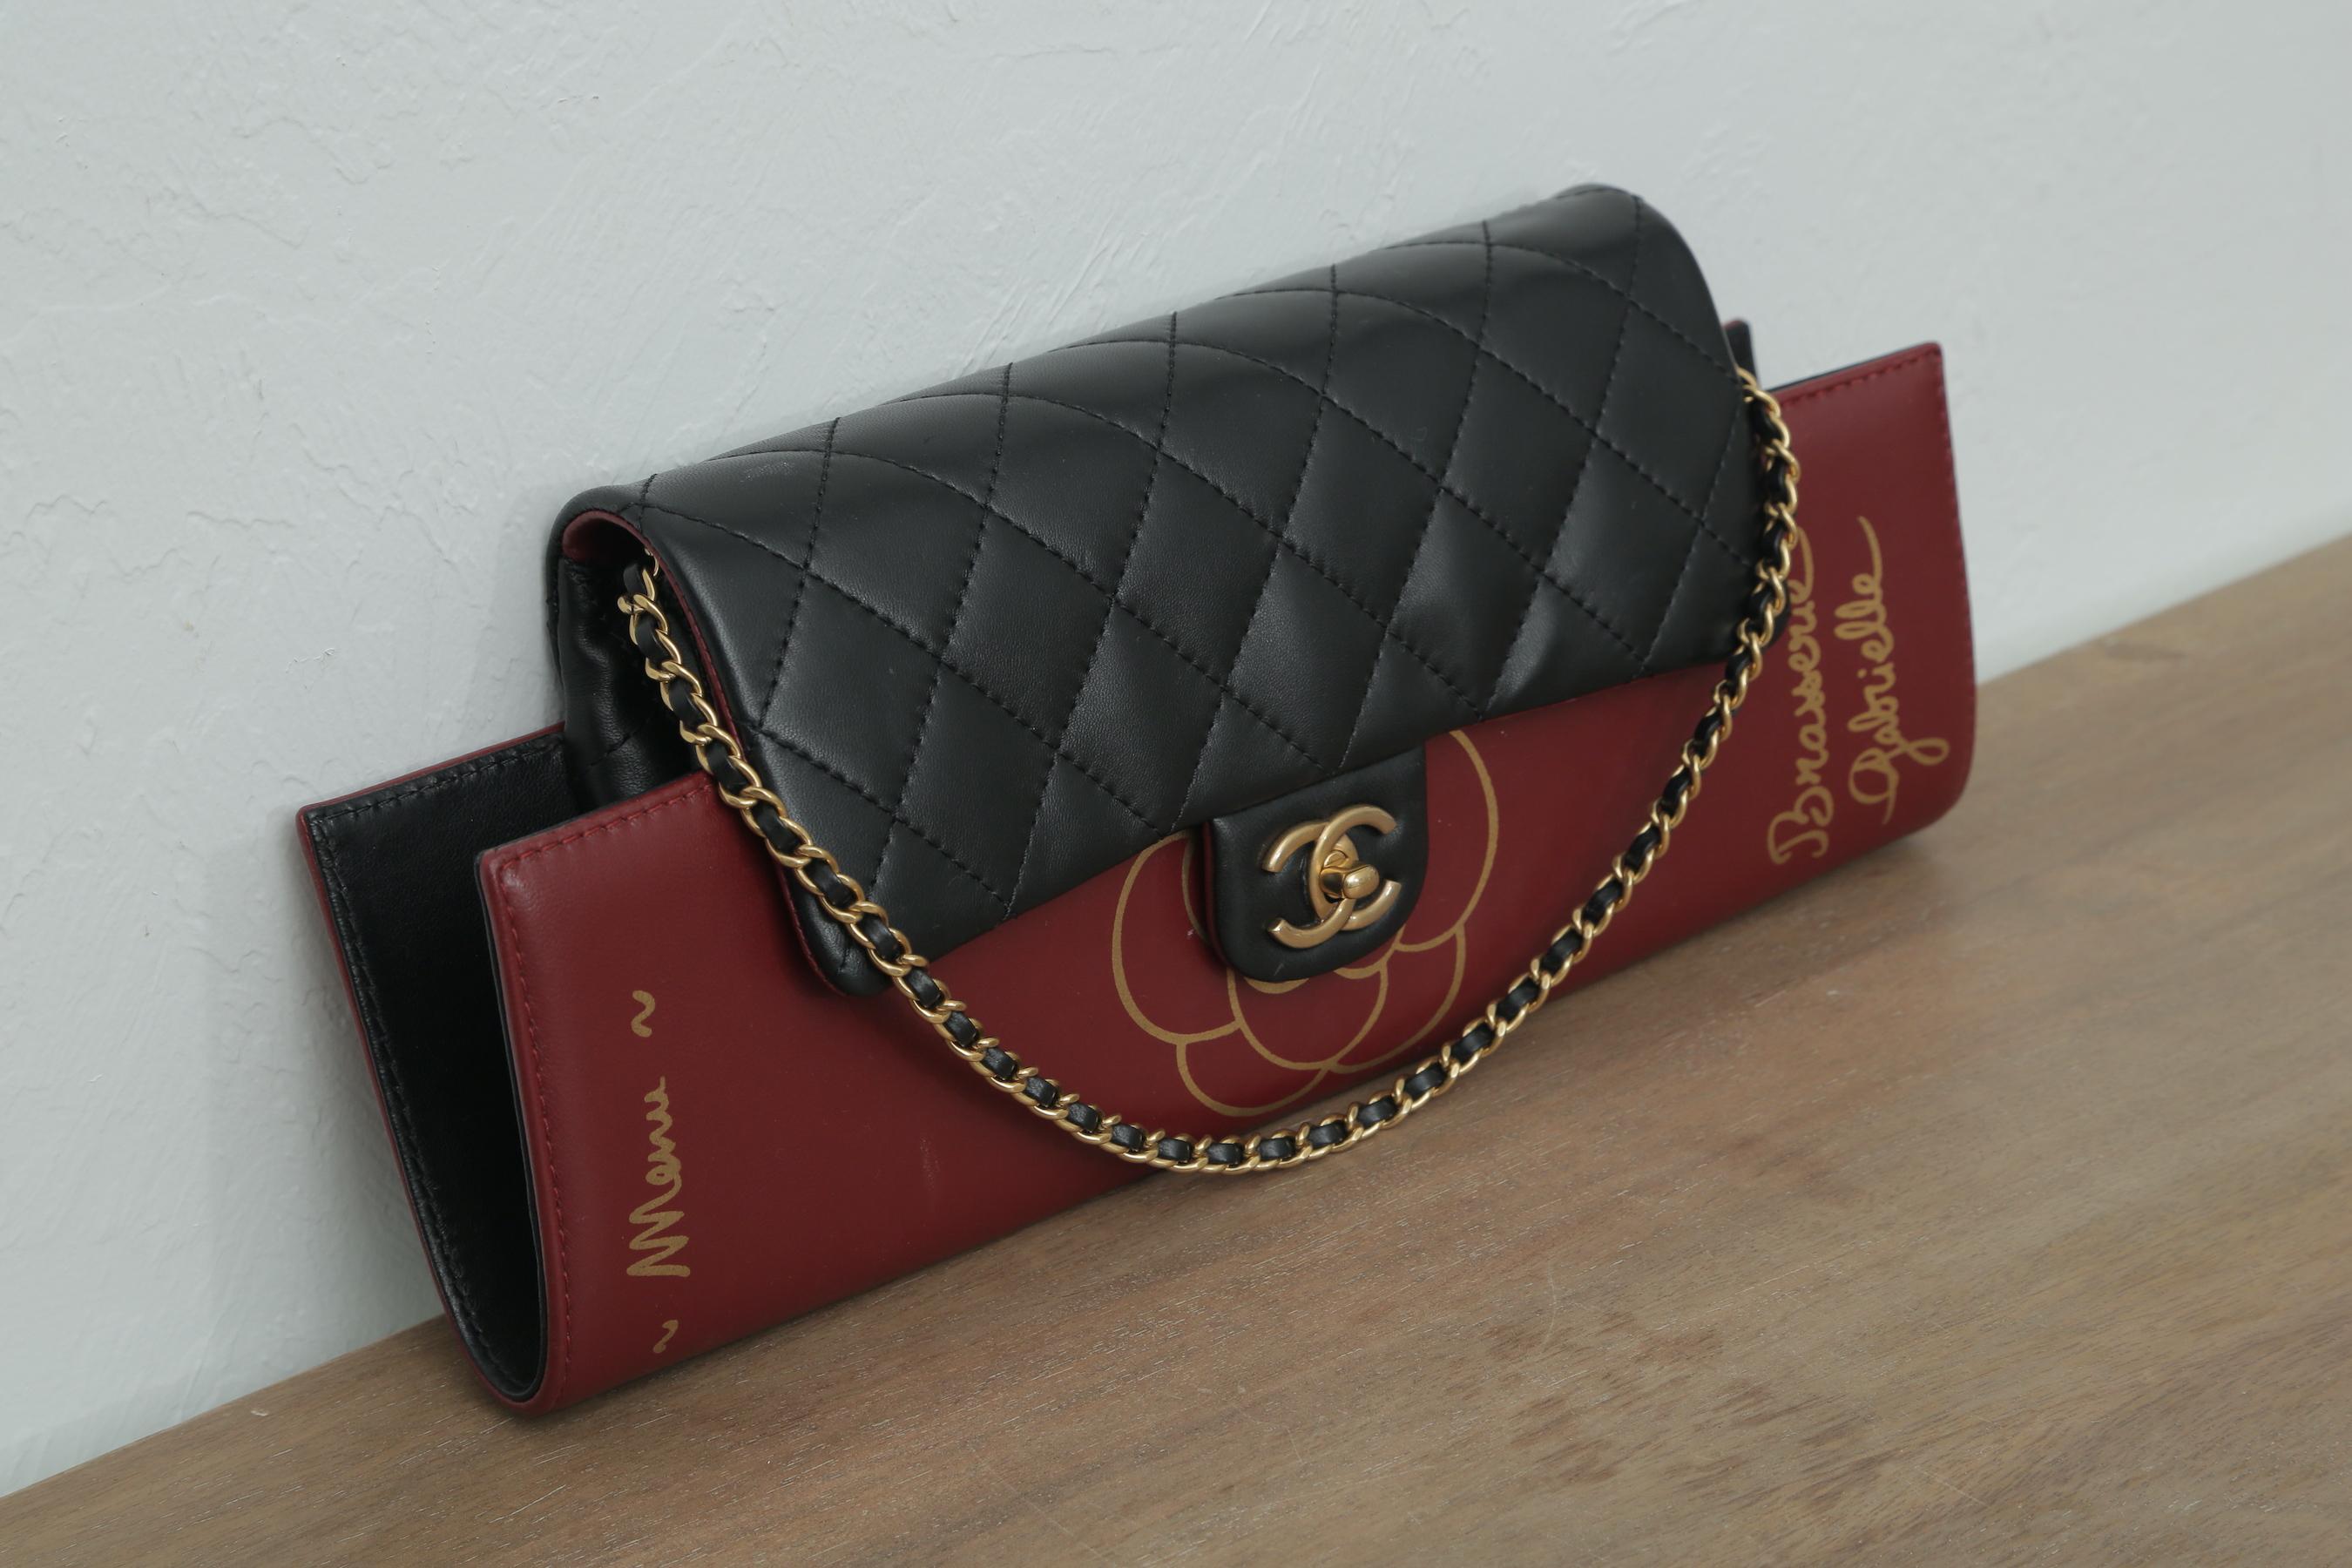 Burgundy lambskin and quilted diamond stitch Chanel Menu clutch flap

Year: 2015
Gold hardware
Classic interlocking cc clasp
Interior large pocket
Two additional interior pockets
Interwoven chain
Can be worn as flap or clutch
6.5” H x 15” W x 2”